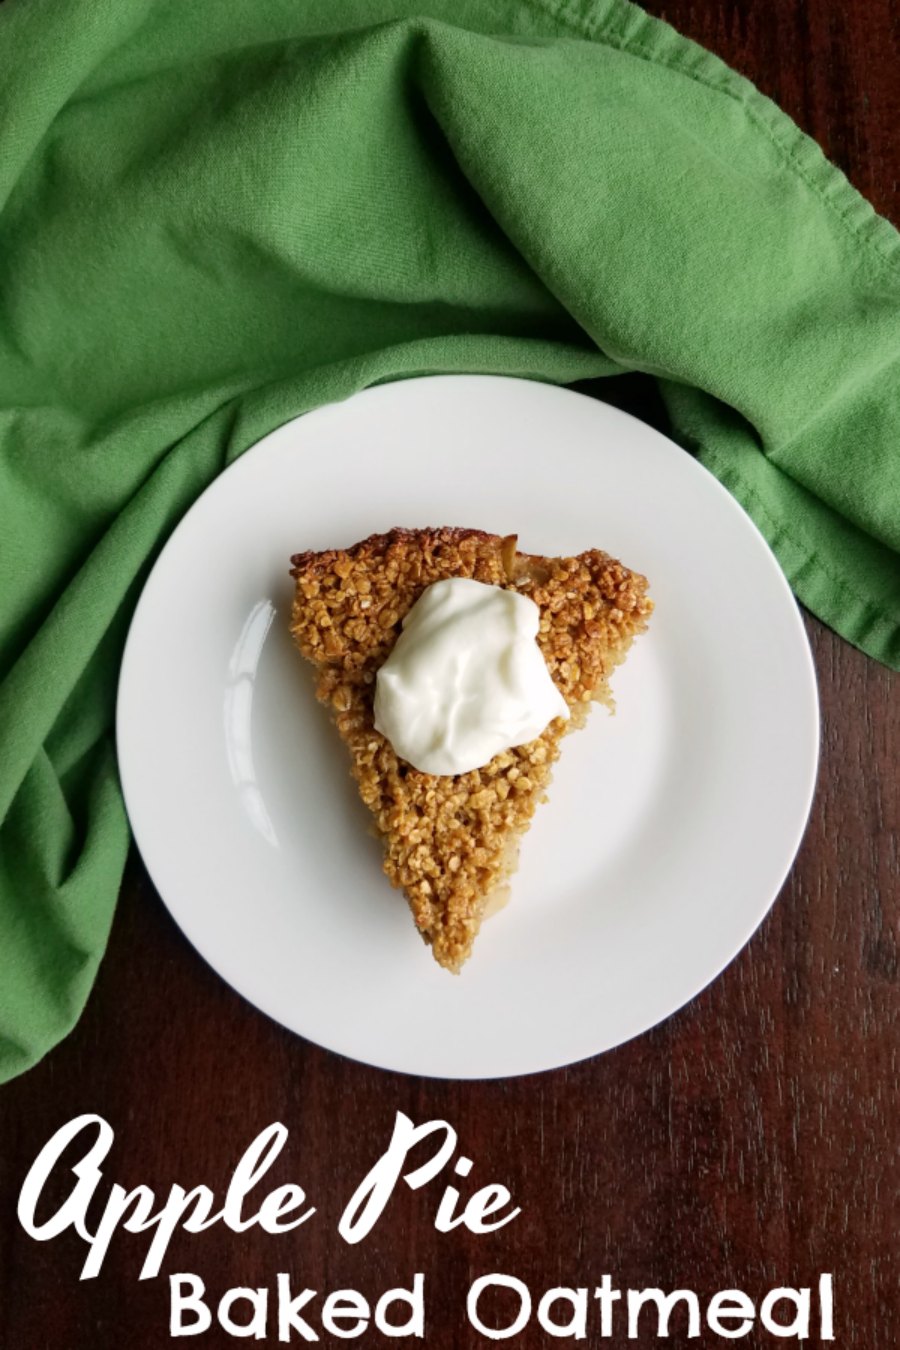 This fun breakfast has the flavors of apple pie baked right into a nutritious oatmeal package. It is easy to make and the leftovers are great too!